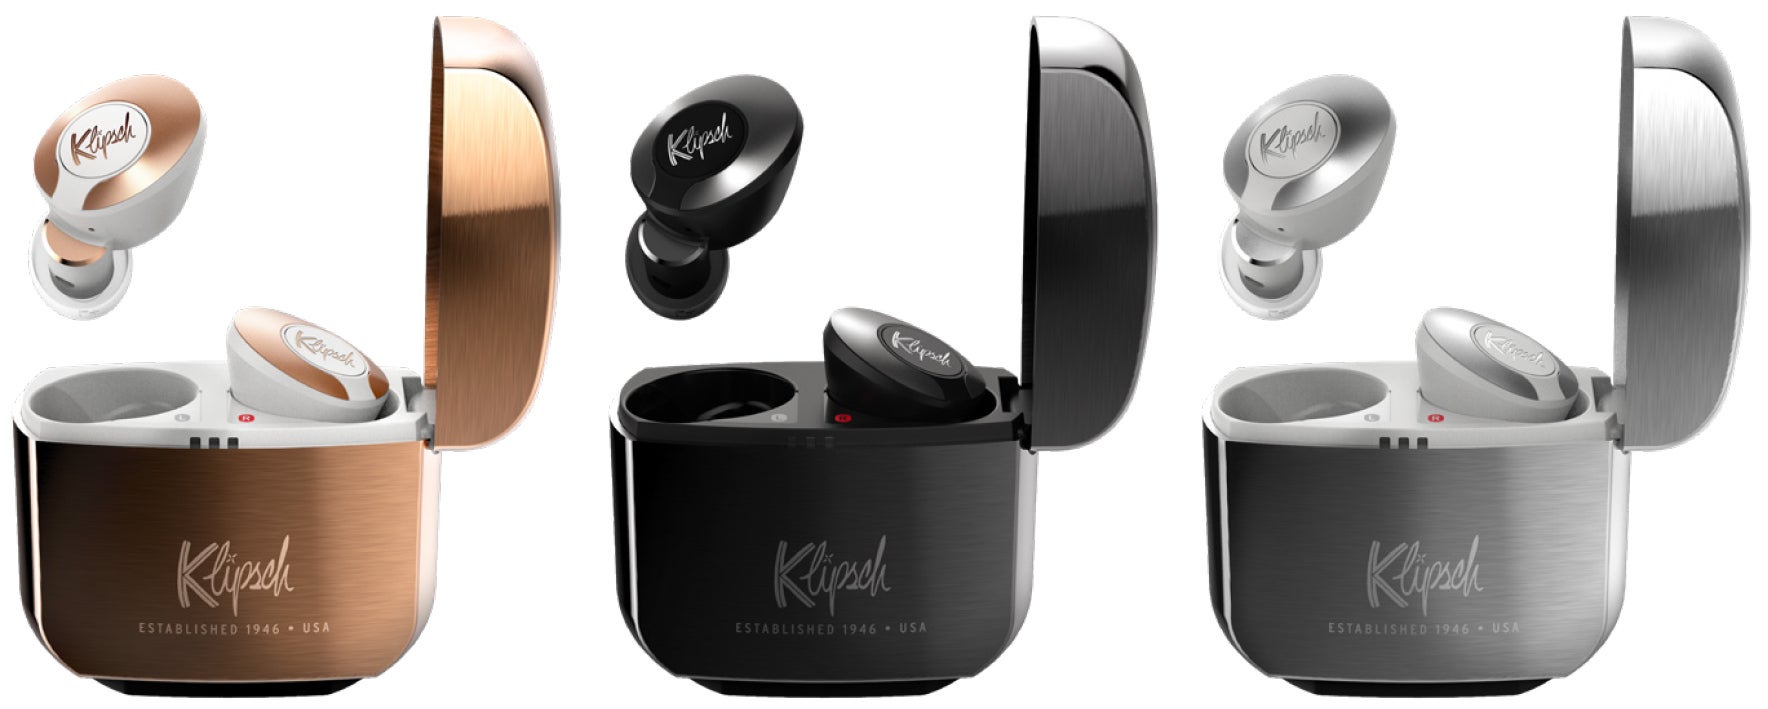 The redesigned charging case is available in three finishes: copper, gunmetal, and silver. (Image: Klipsch)